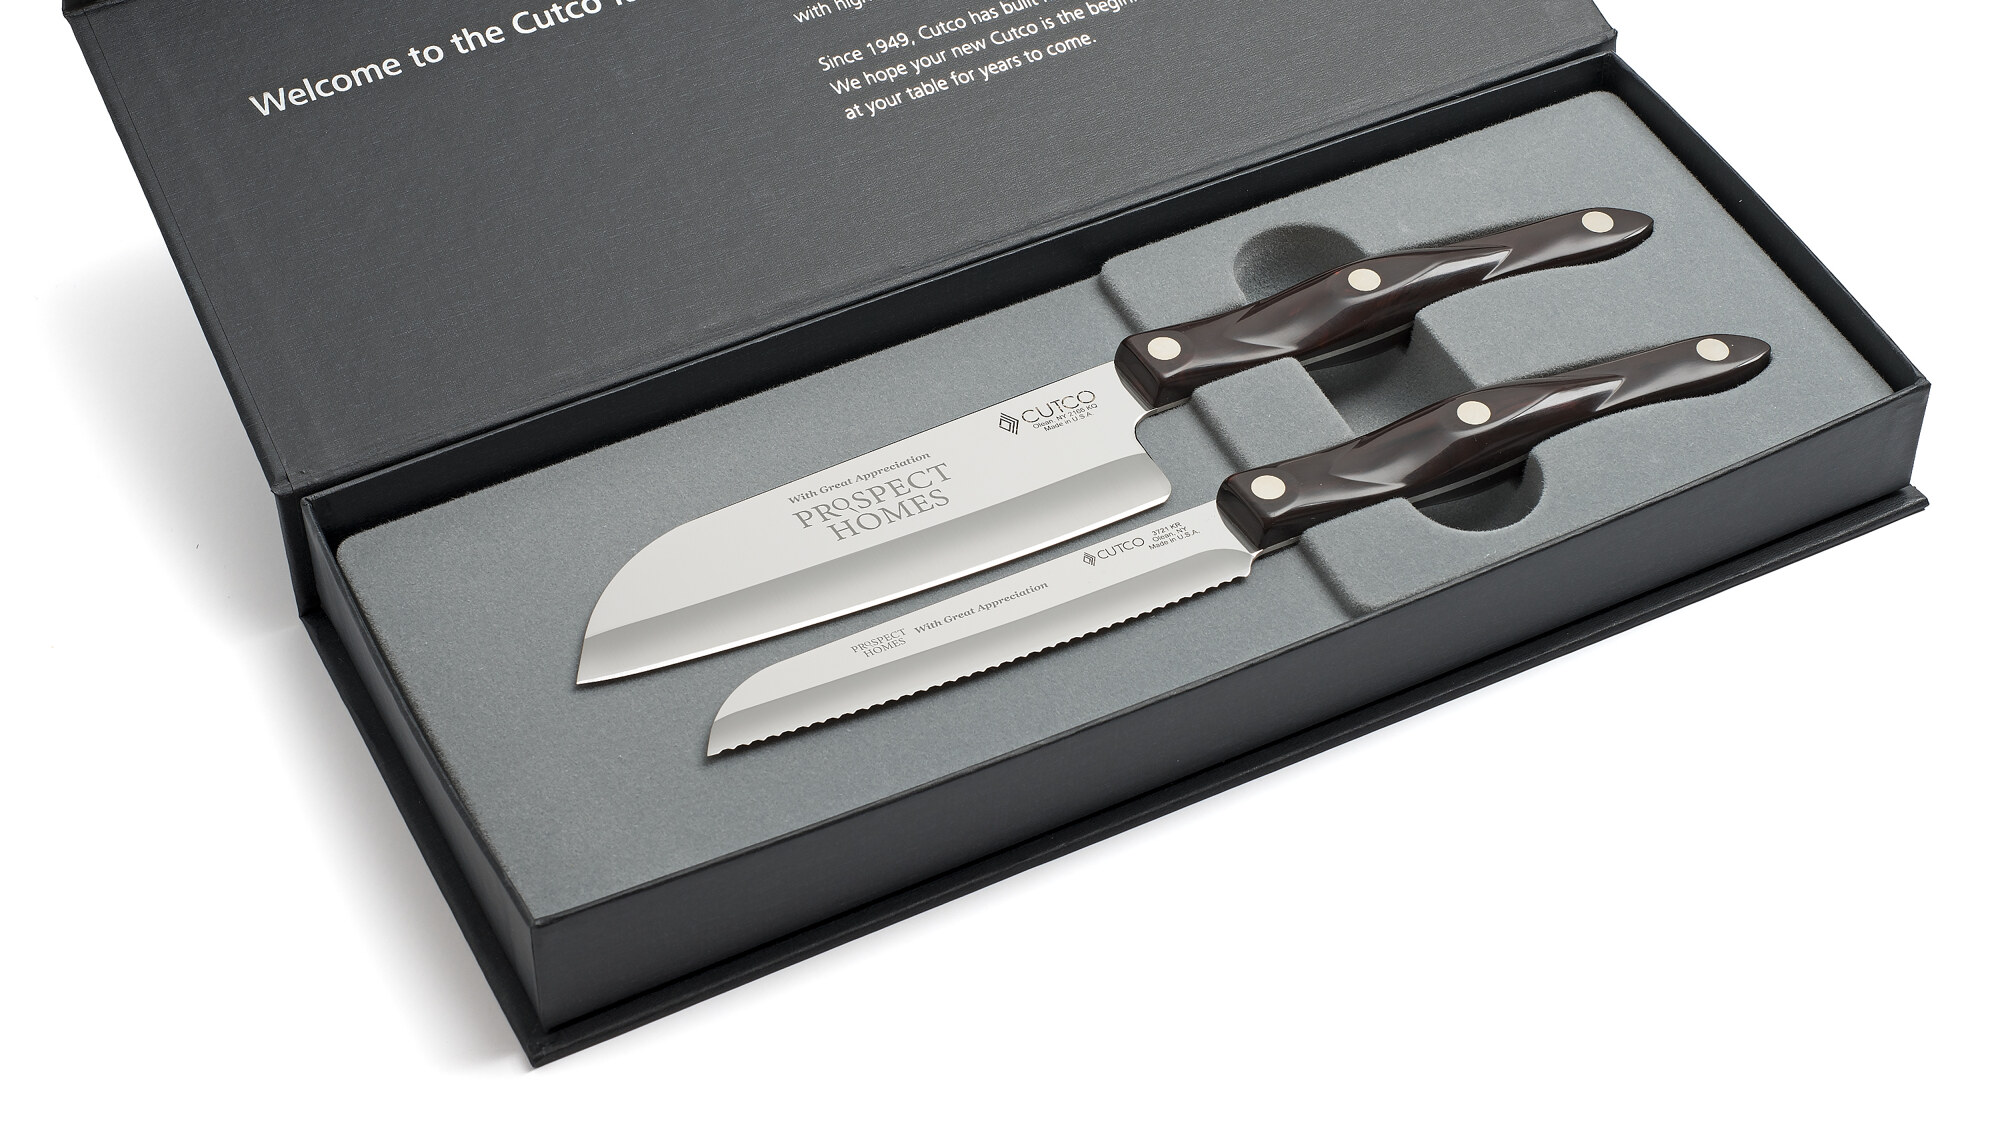 2 Products - Petite Santoku-Style Cook's Combo Product in Deluxe Gift Box